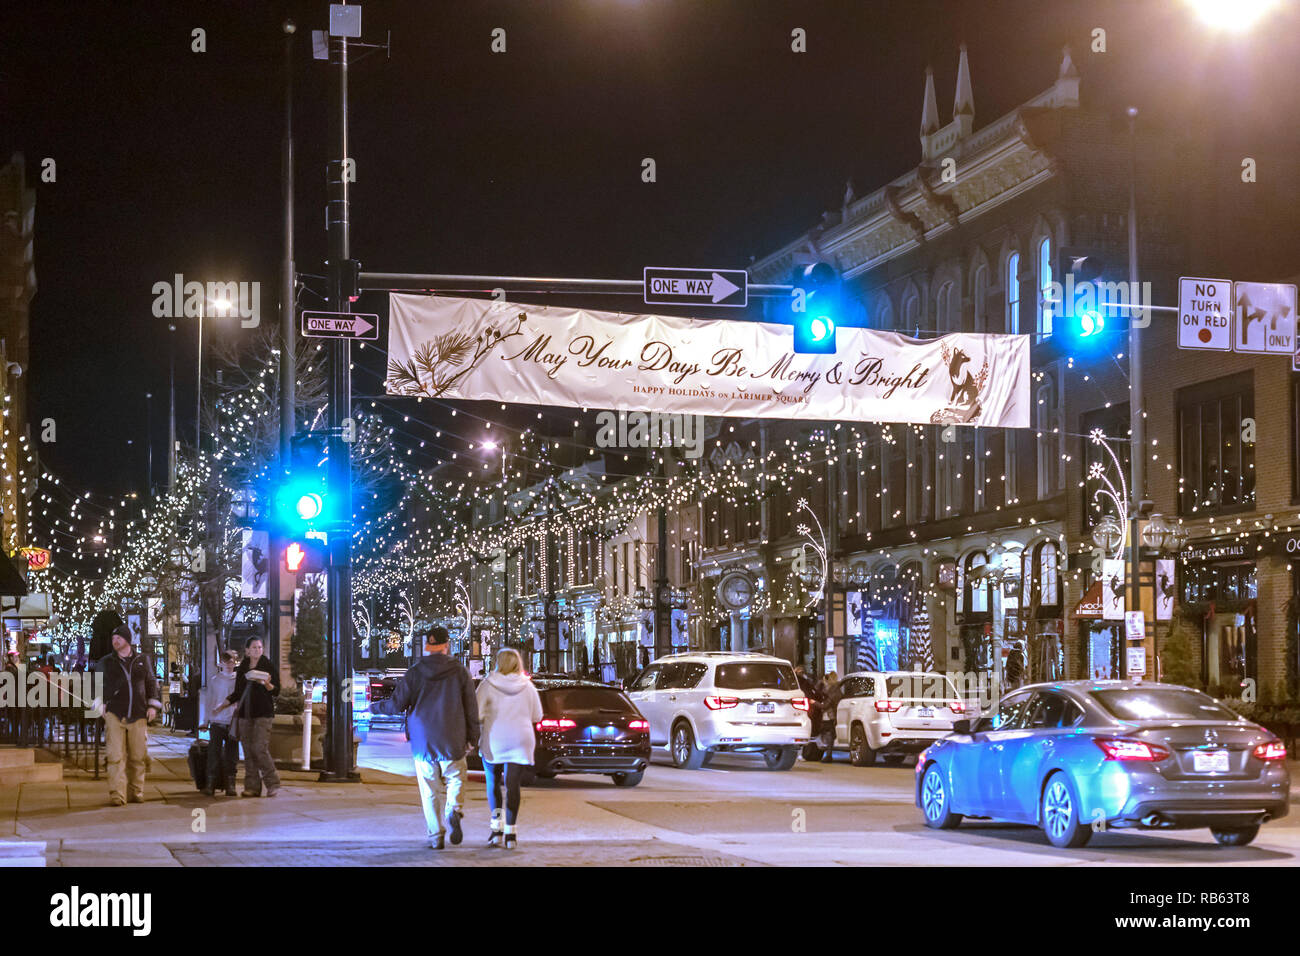 Denver, Colorado - Larimer Square, decorated with Christmas lights. It is the oldest commercial block in Denver. Stock Photo